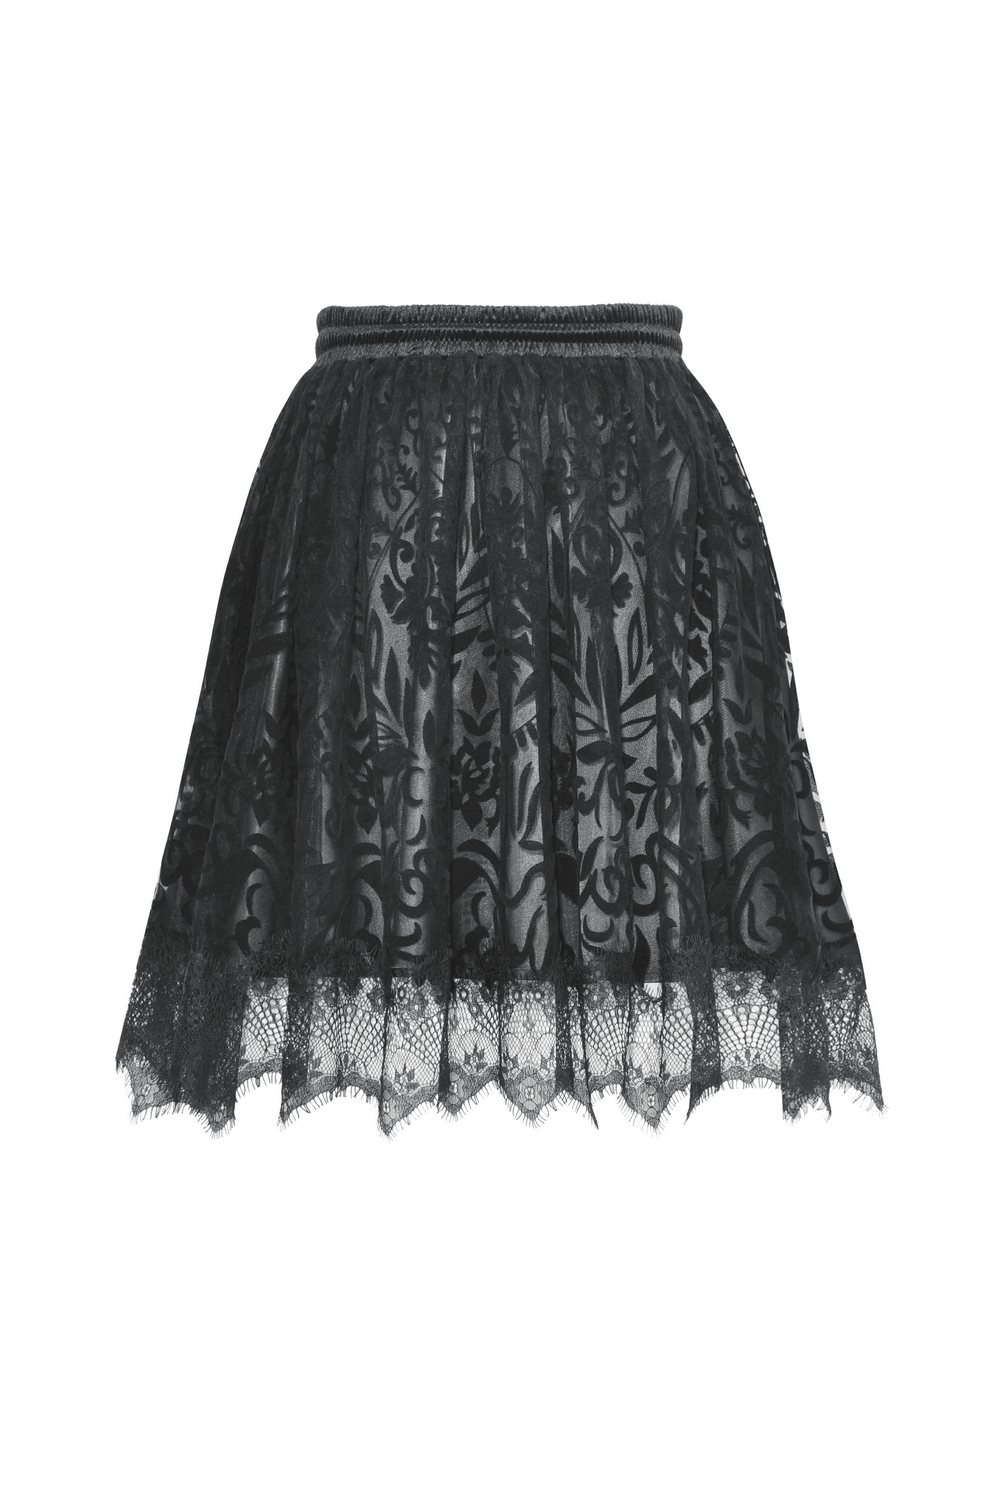 Elegant and Romantic Floral Lace Midi Skirt for Ladies